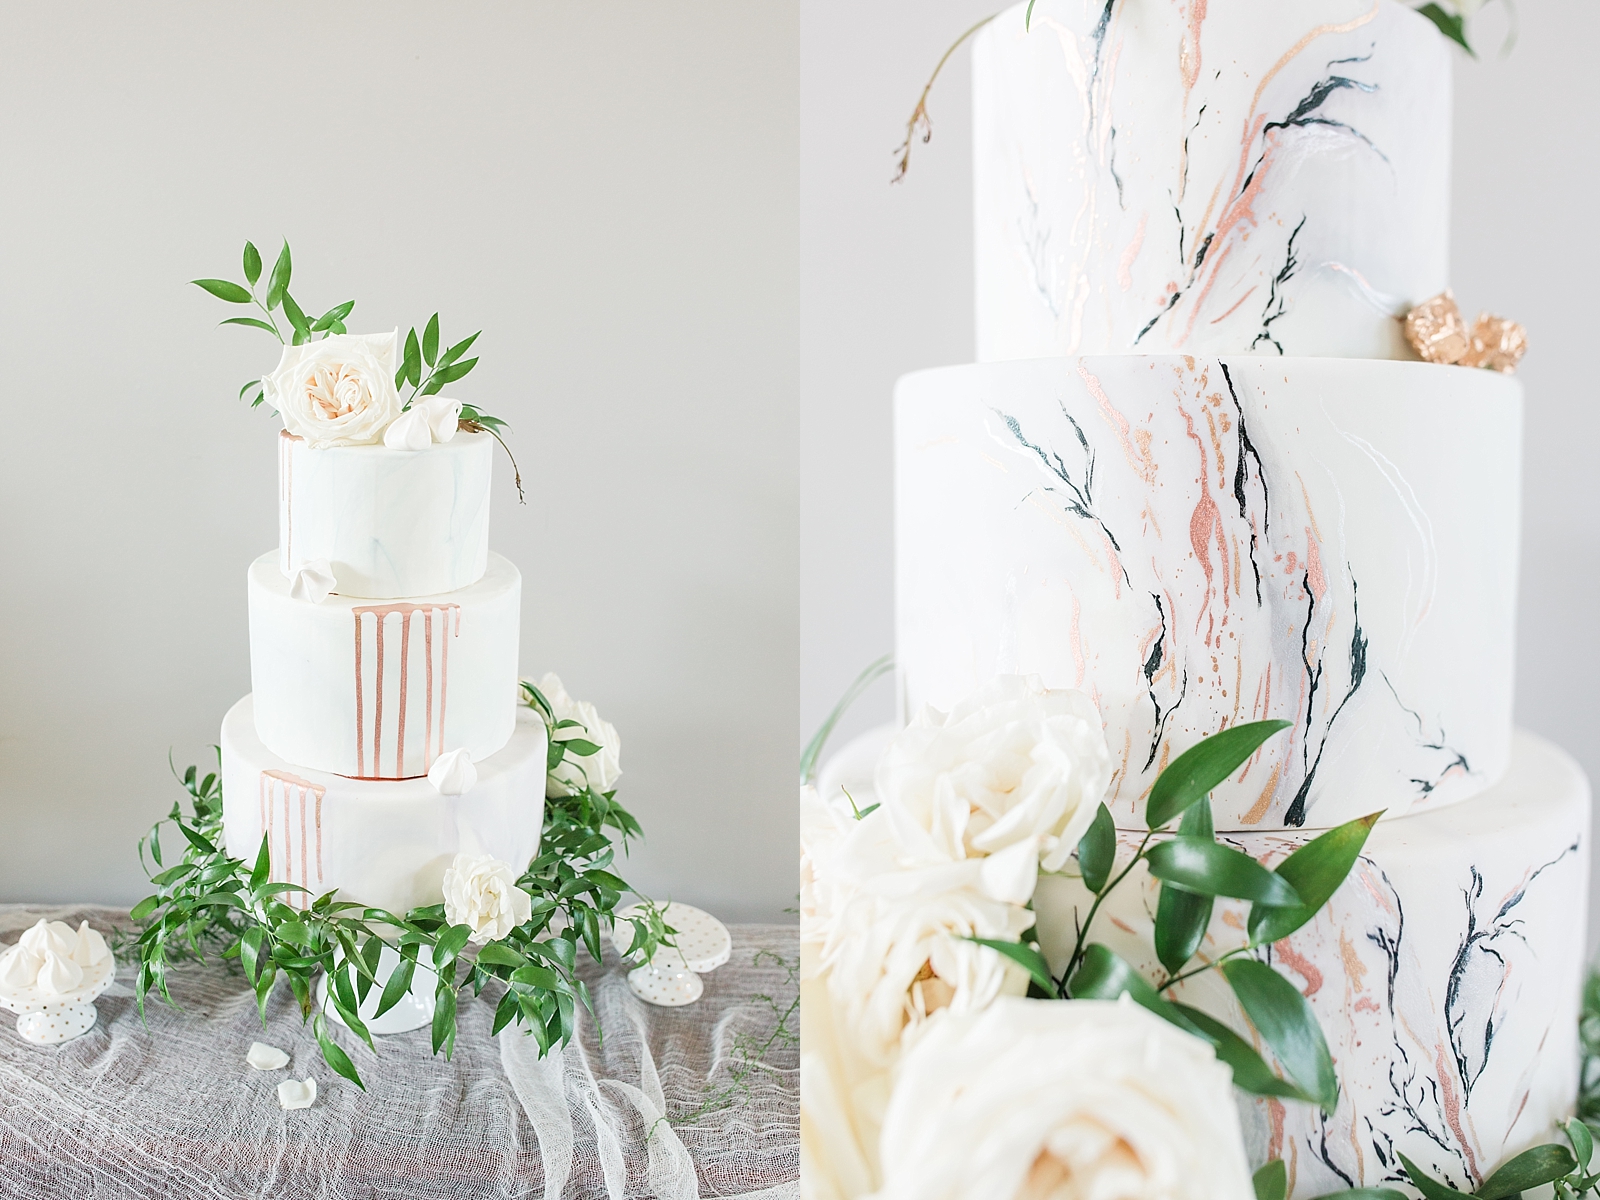 Atlanta Georgia Wedding cake with gold drips on side and gold leafing on the other side with white roses Photos